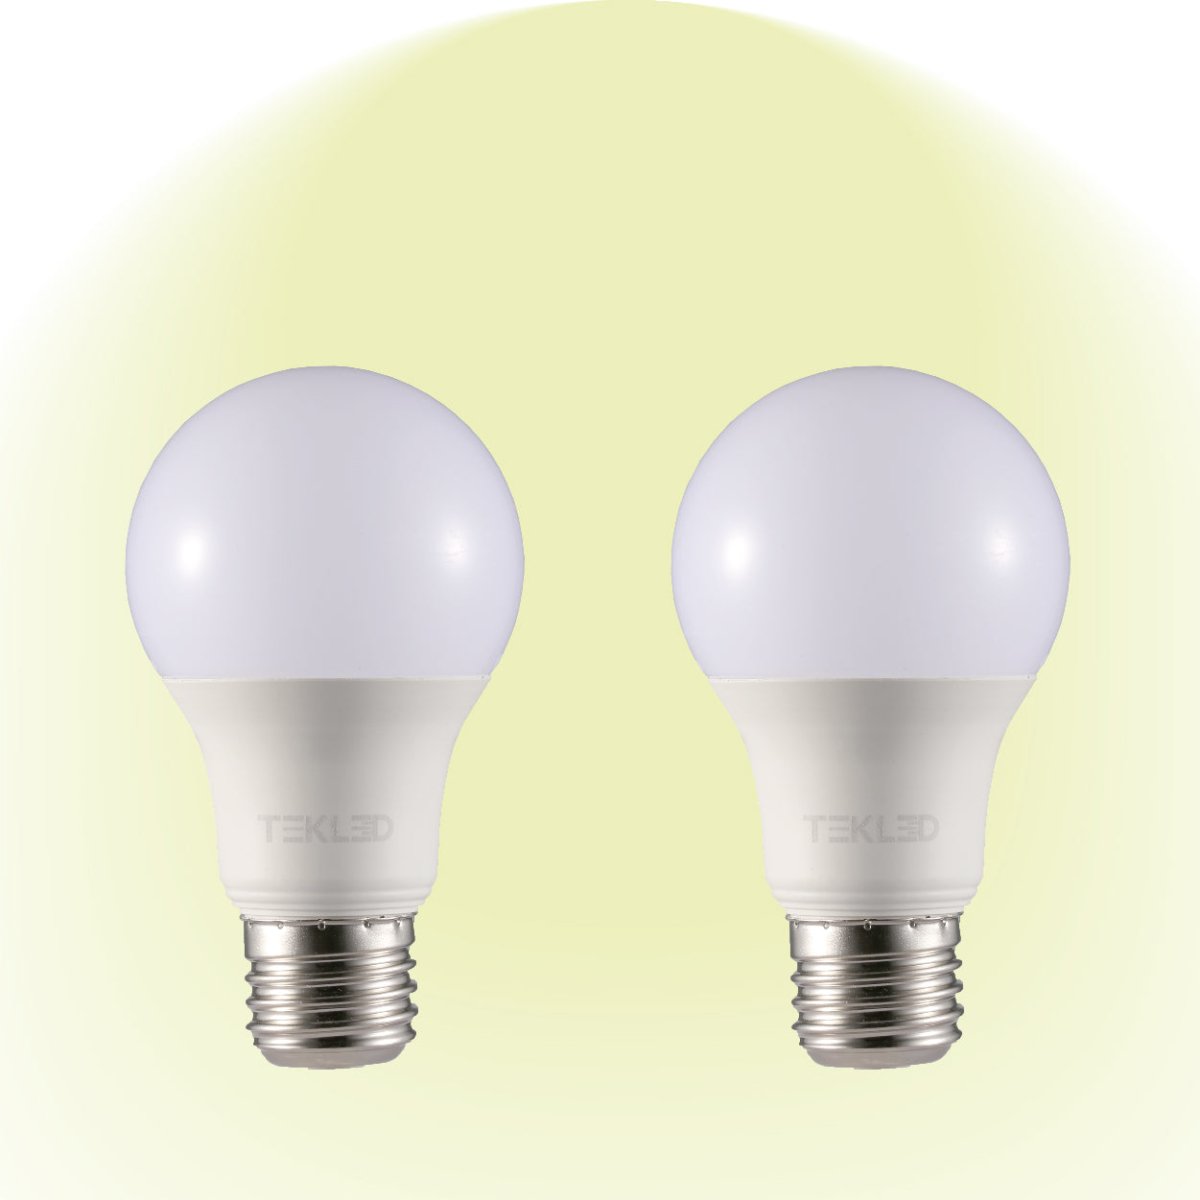 Virgo LED GLS Bulb A60 Dimmable E27 Edison Screw 4000K Cool White 7 W Pack of 2 527-15618